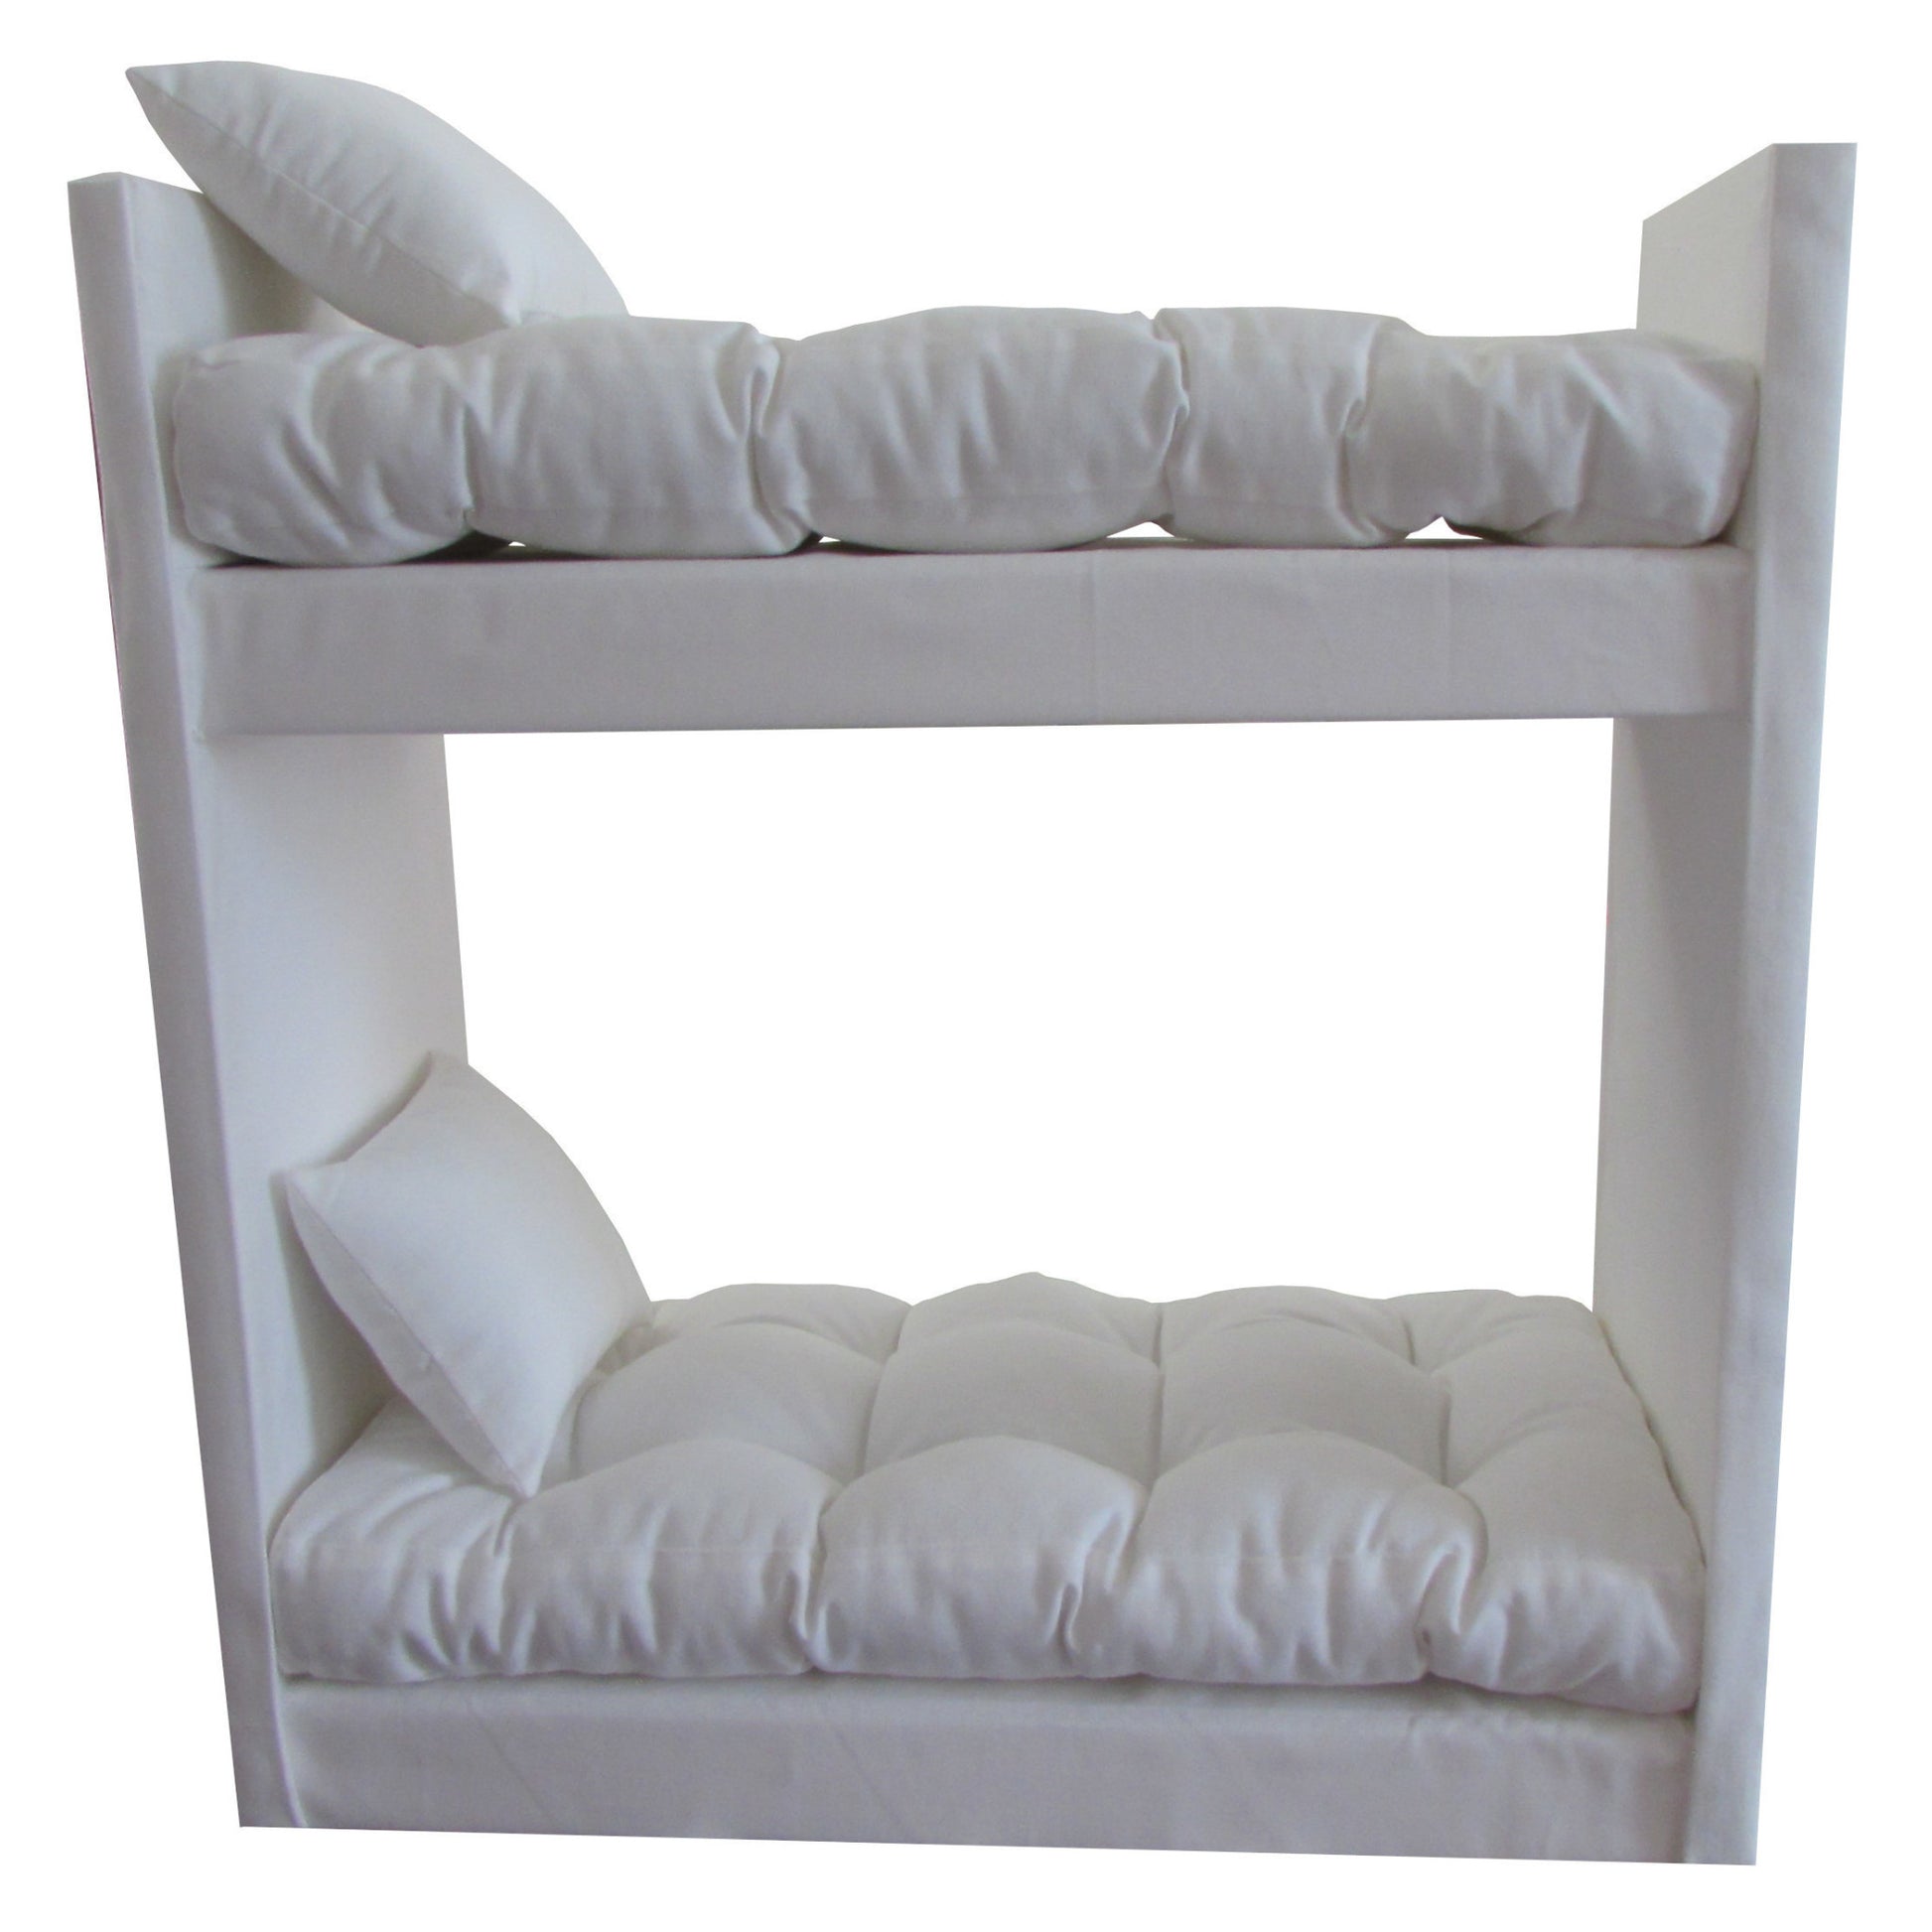 Upholstered White Doll Bunk Bed for 14.5-inch dolls